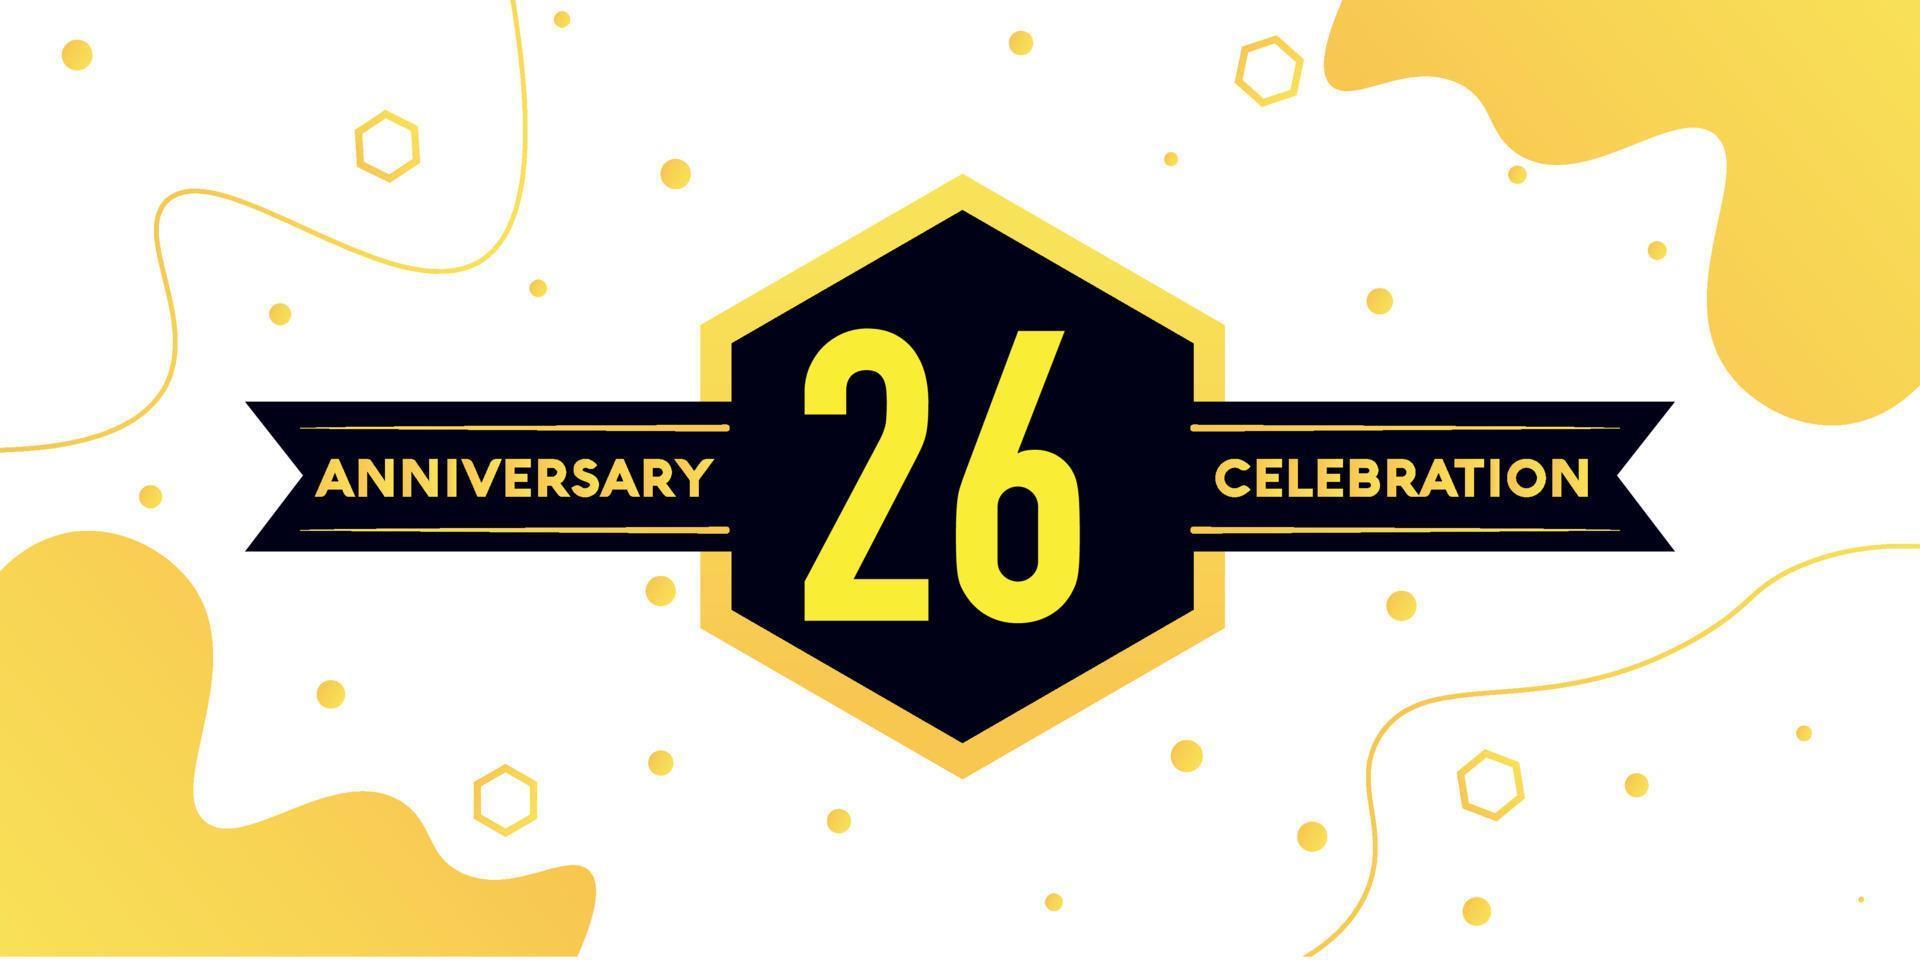 26 years anniversary logo vector design with yellow geometric shape with black and abstract design on white background template